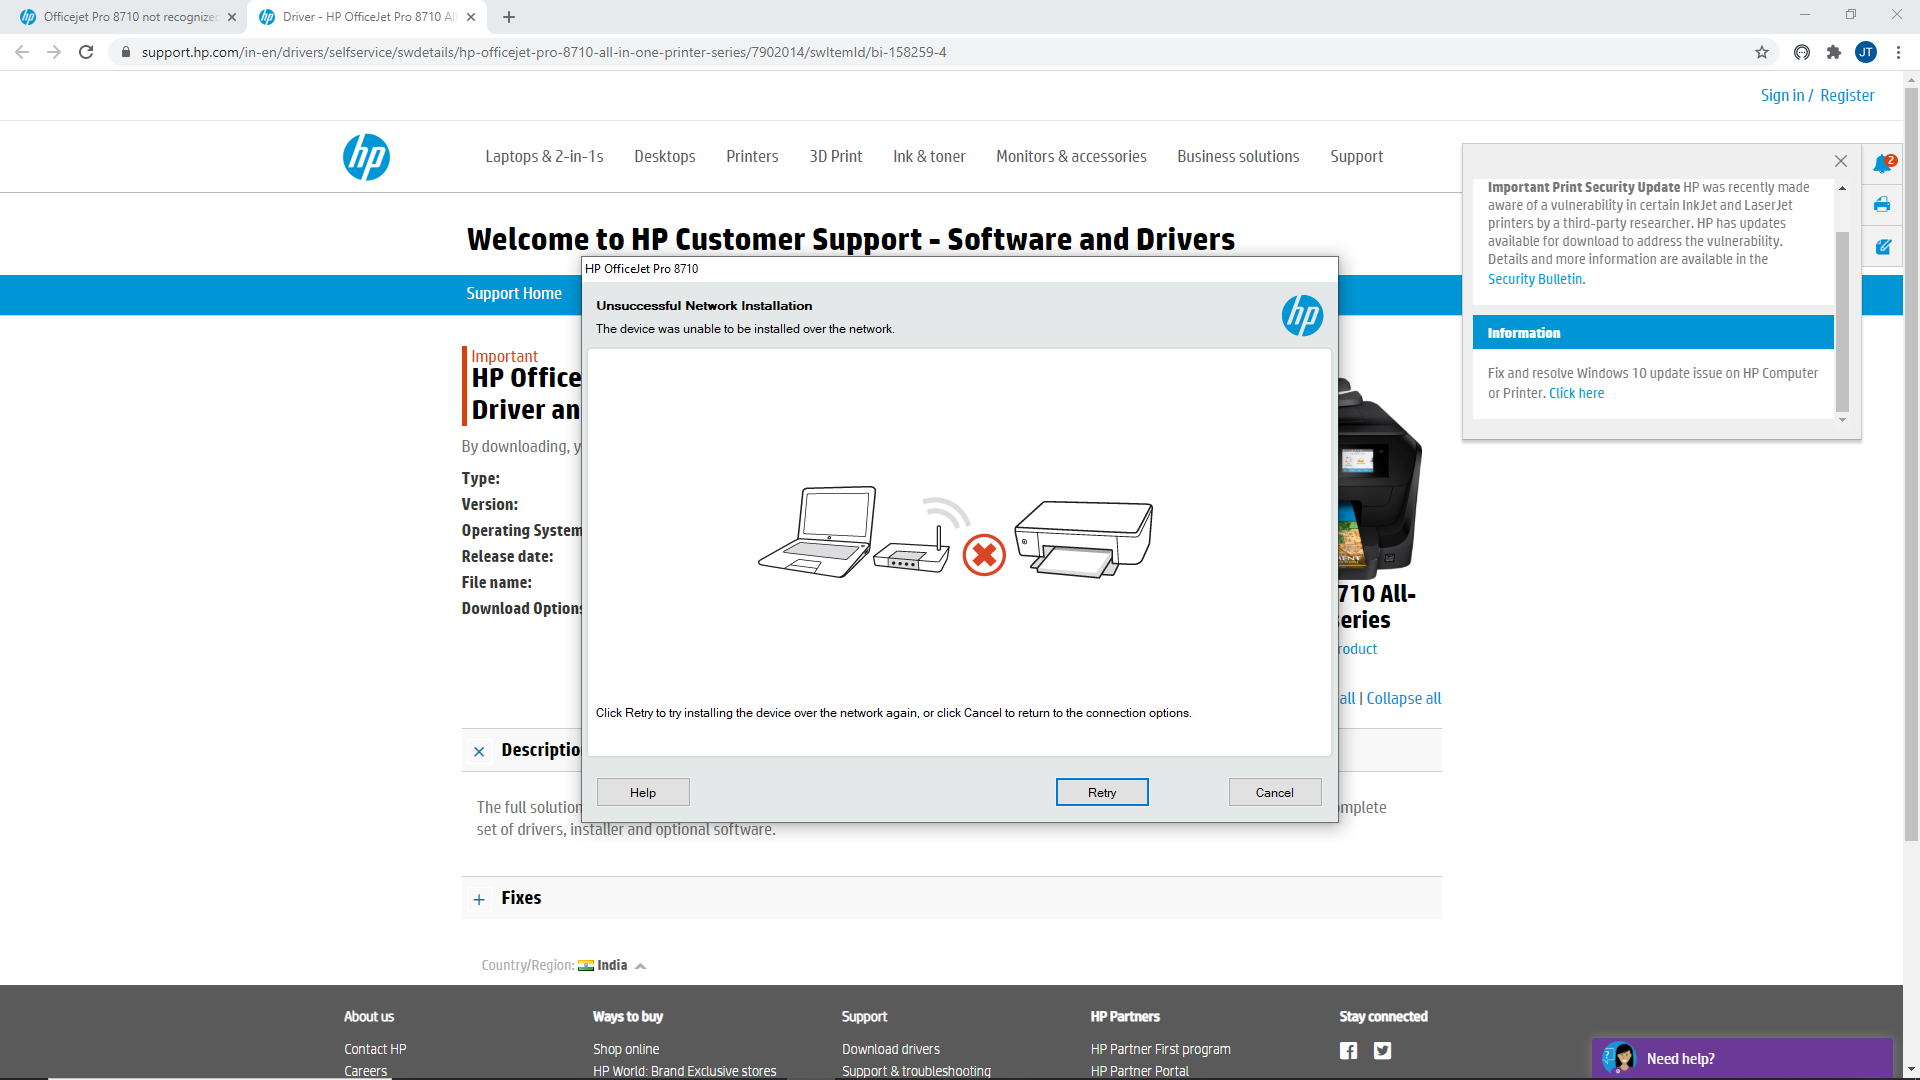 Officejet Pro 8710 not recognized after windows 10 1903 upda... - HP Support  Community - 7722726